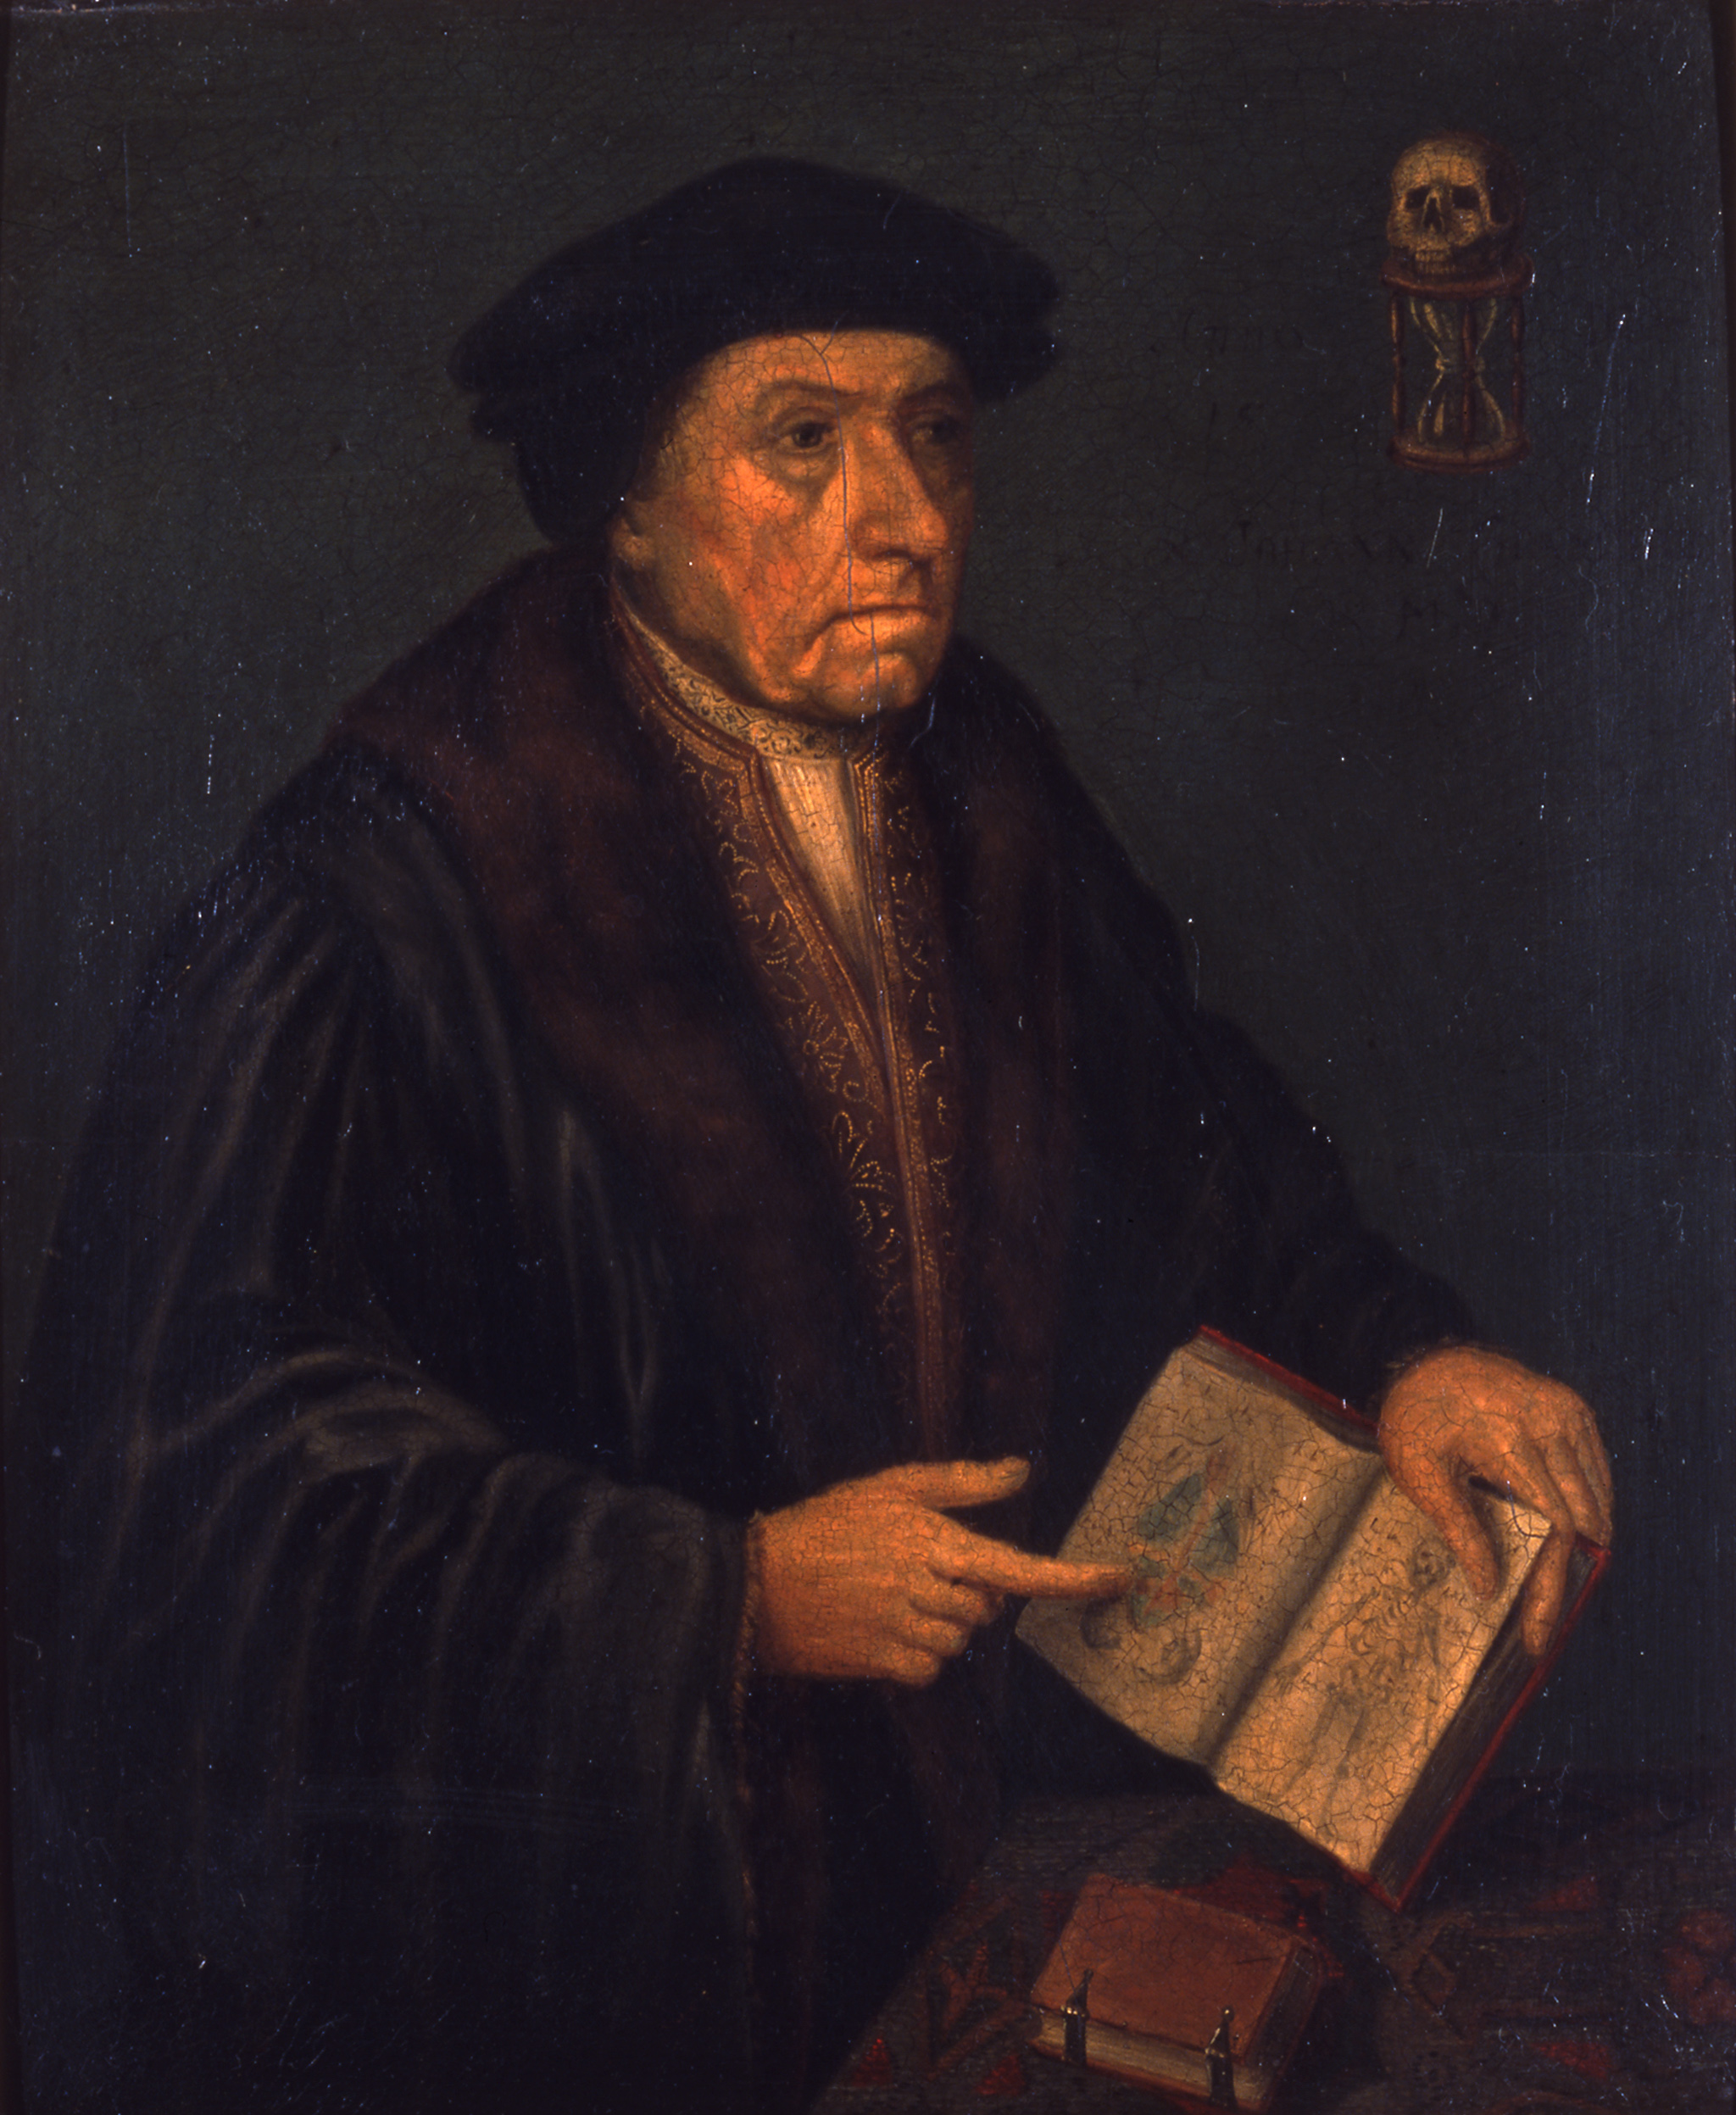 Three quarter size portrait of John Chambre. A man wearing 16th century clothing points to an open book.